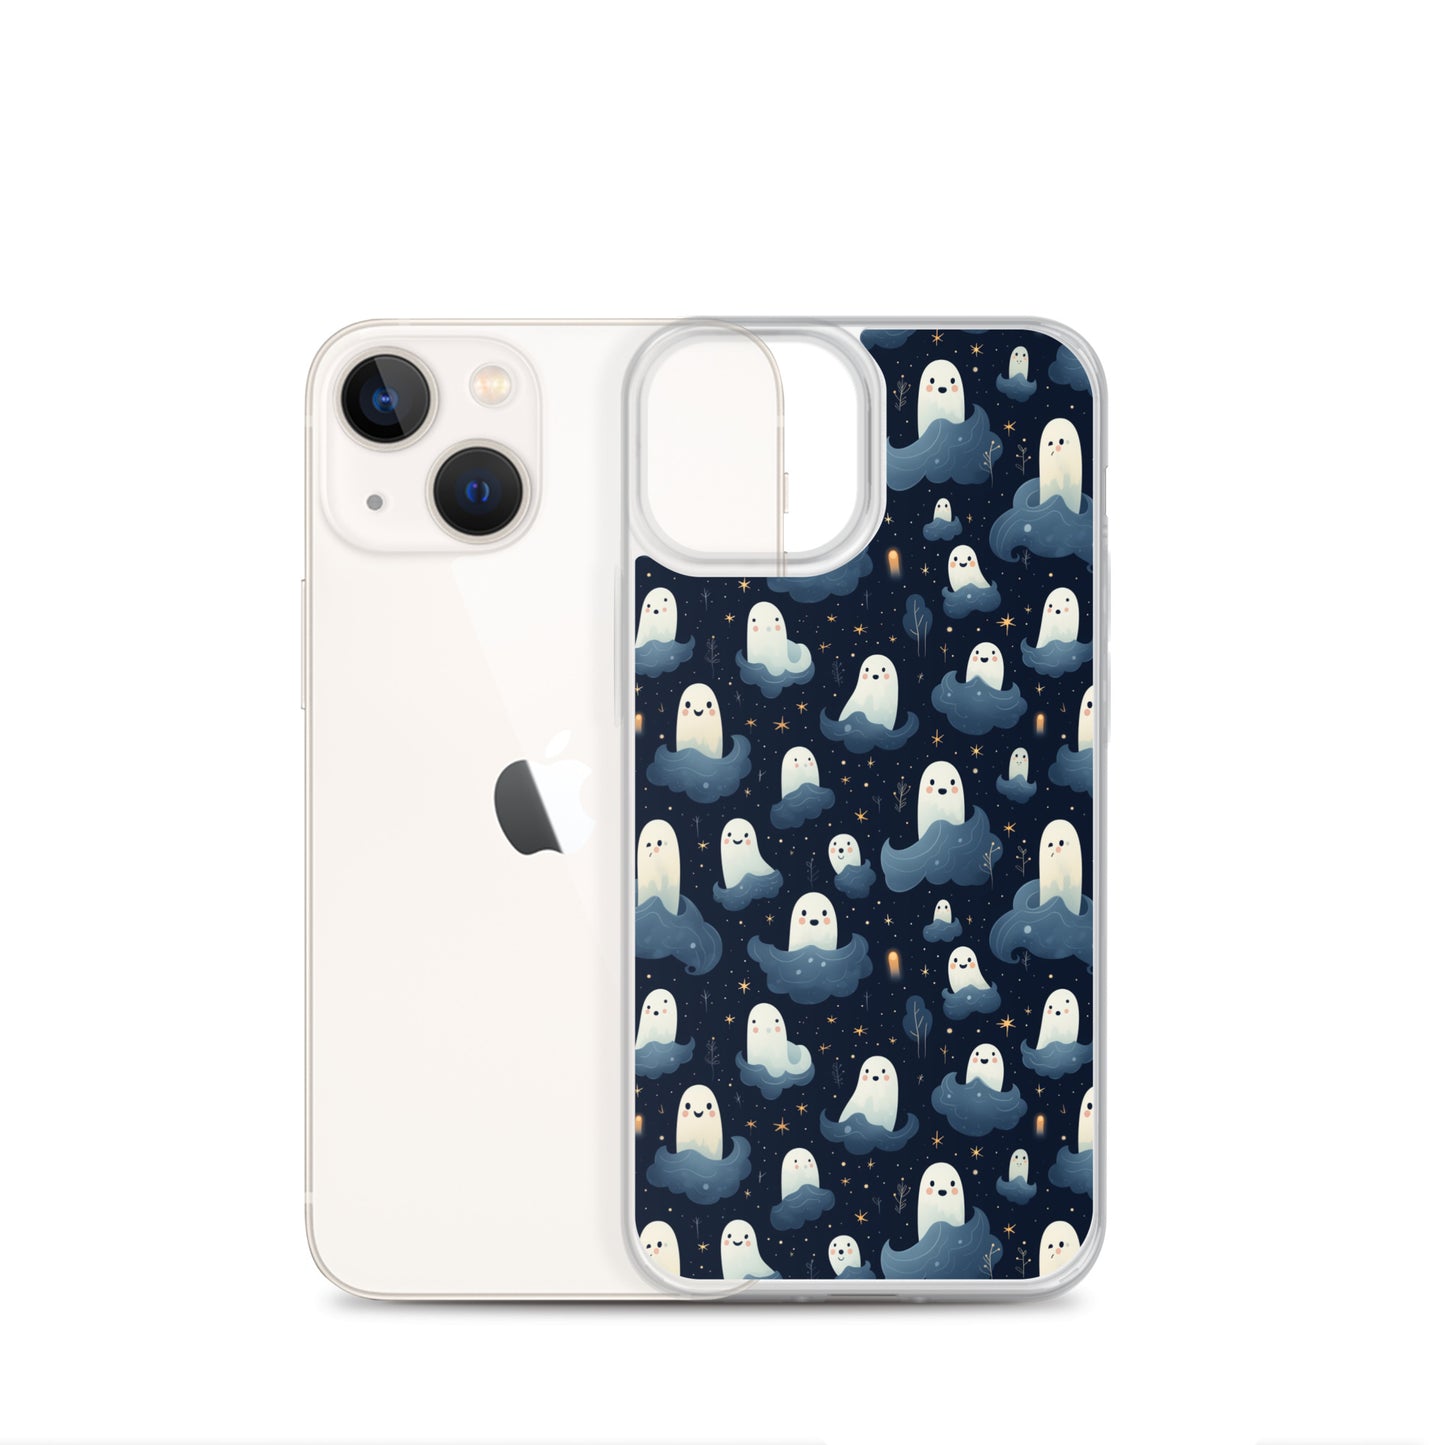 iPhone Case - Friendly Ghosts